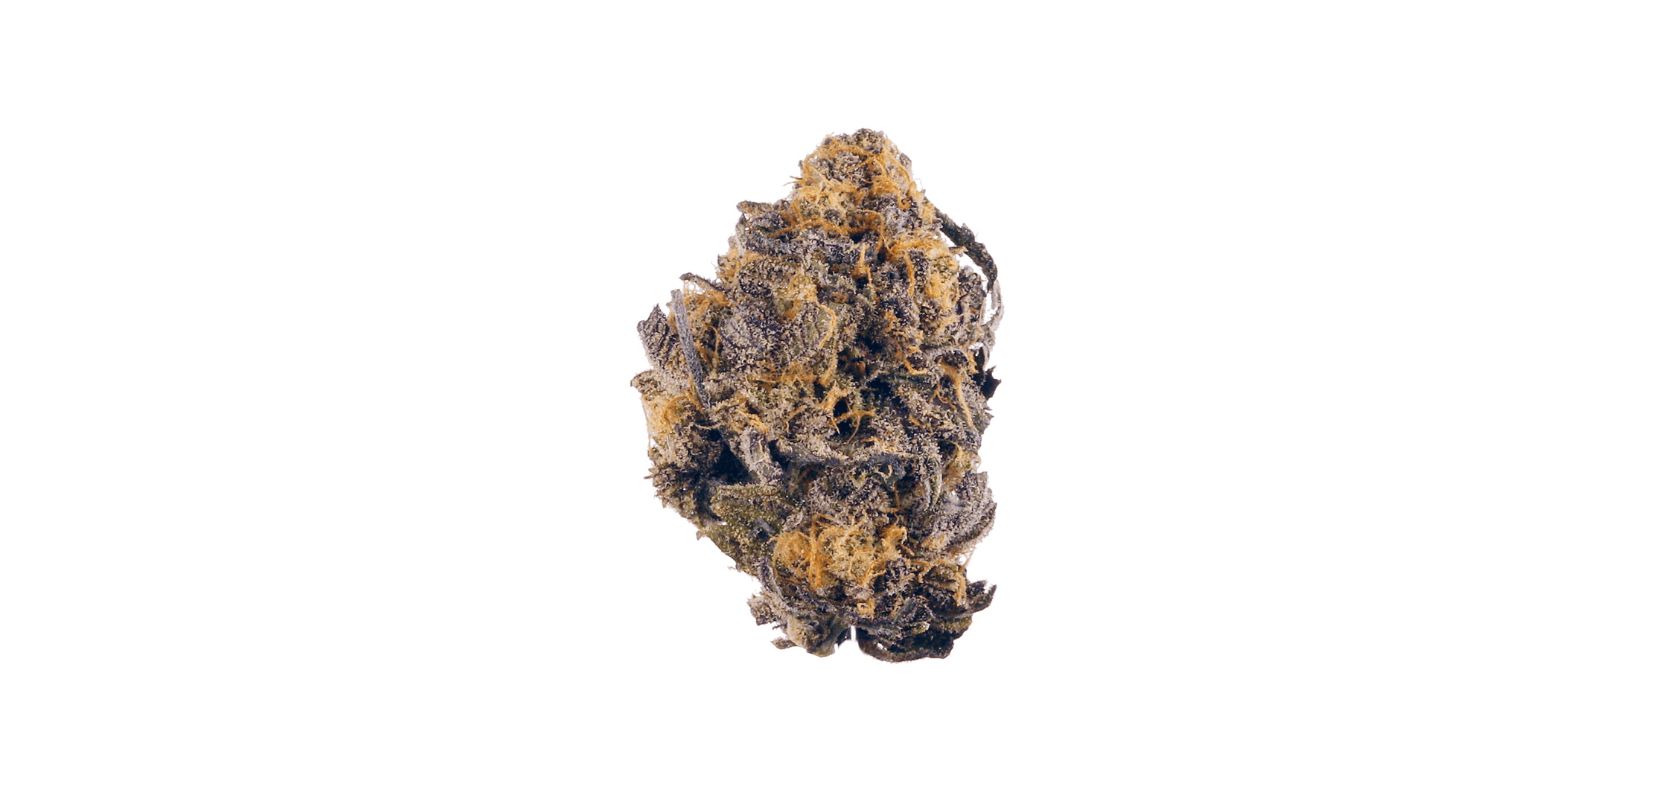 The Black Diamond strain is a popular and potent Indica hybrid that boasts a robust genetic makeup of 70 percent Indica and 30 percent Sativa. 